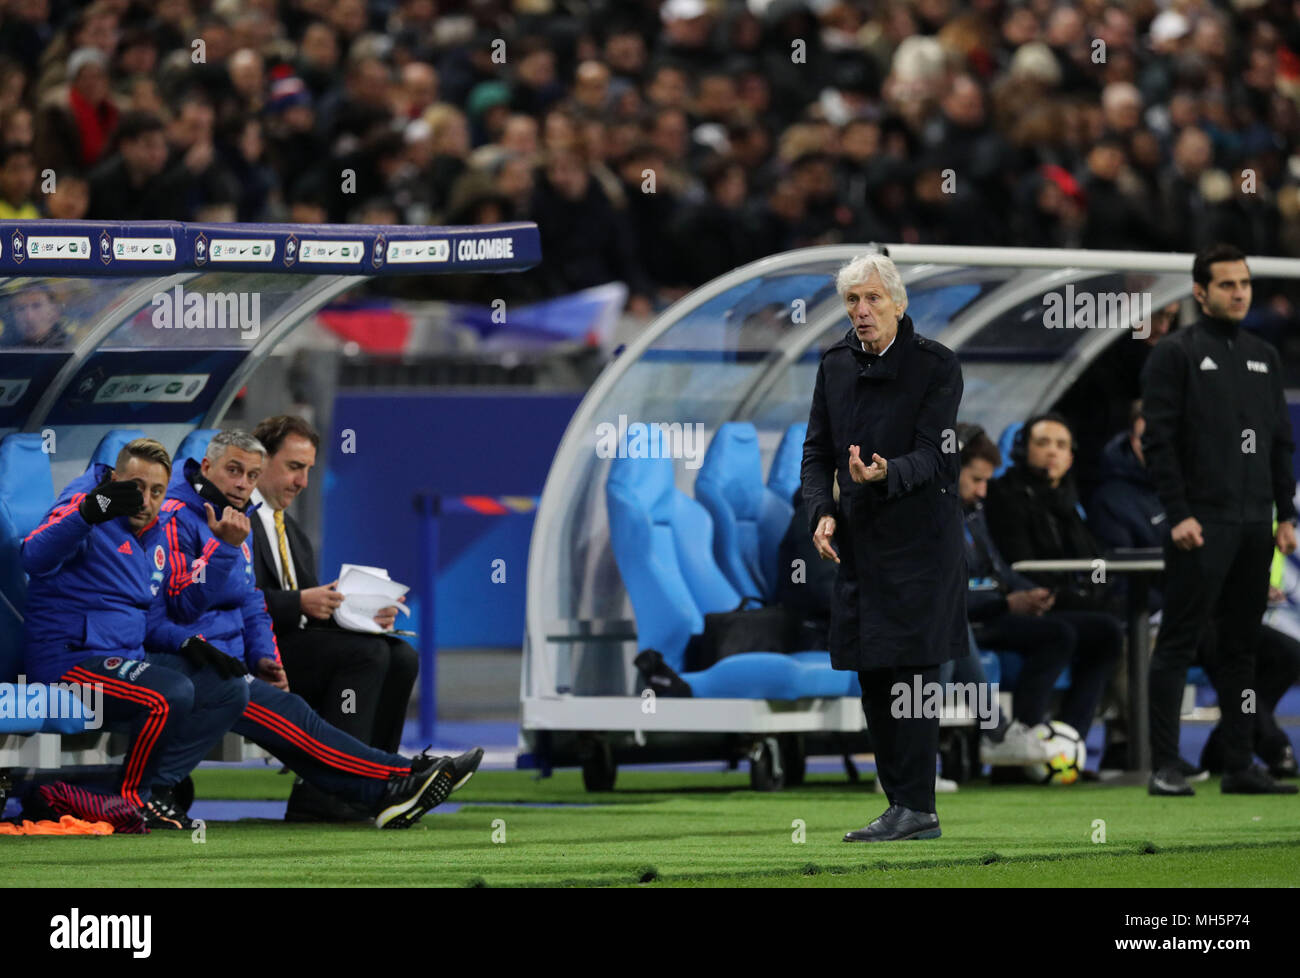 Jose Pekerman (COL), MARCH 23, 2018 - Football/Soccer : International friendly match between France 2-3 Colombia at Stade de France in Saint-Denis, France, Credit: AFLO/Alamy Live News Stock Photo